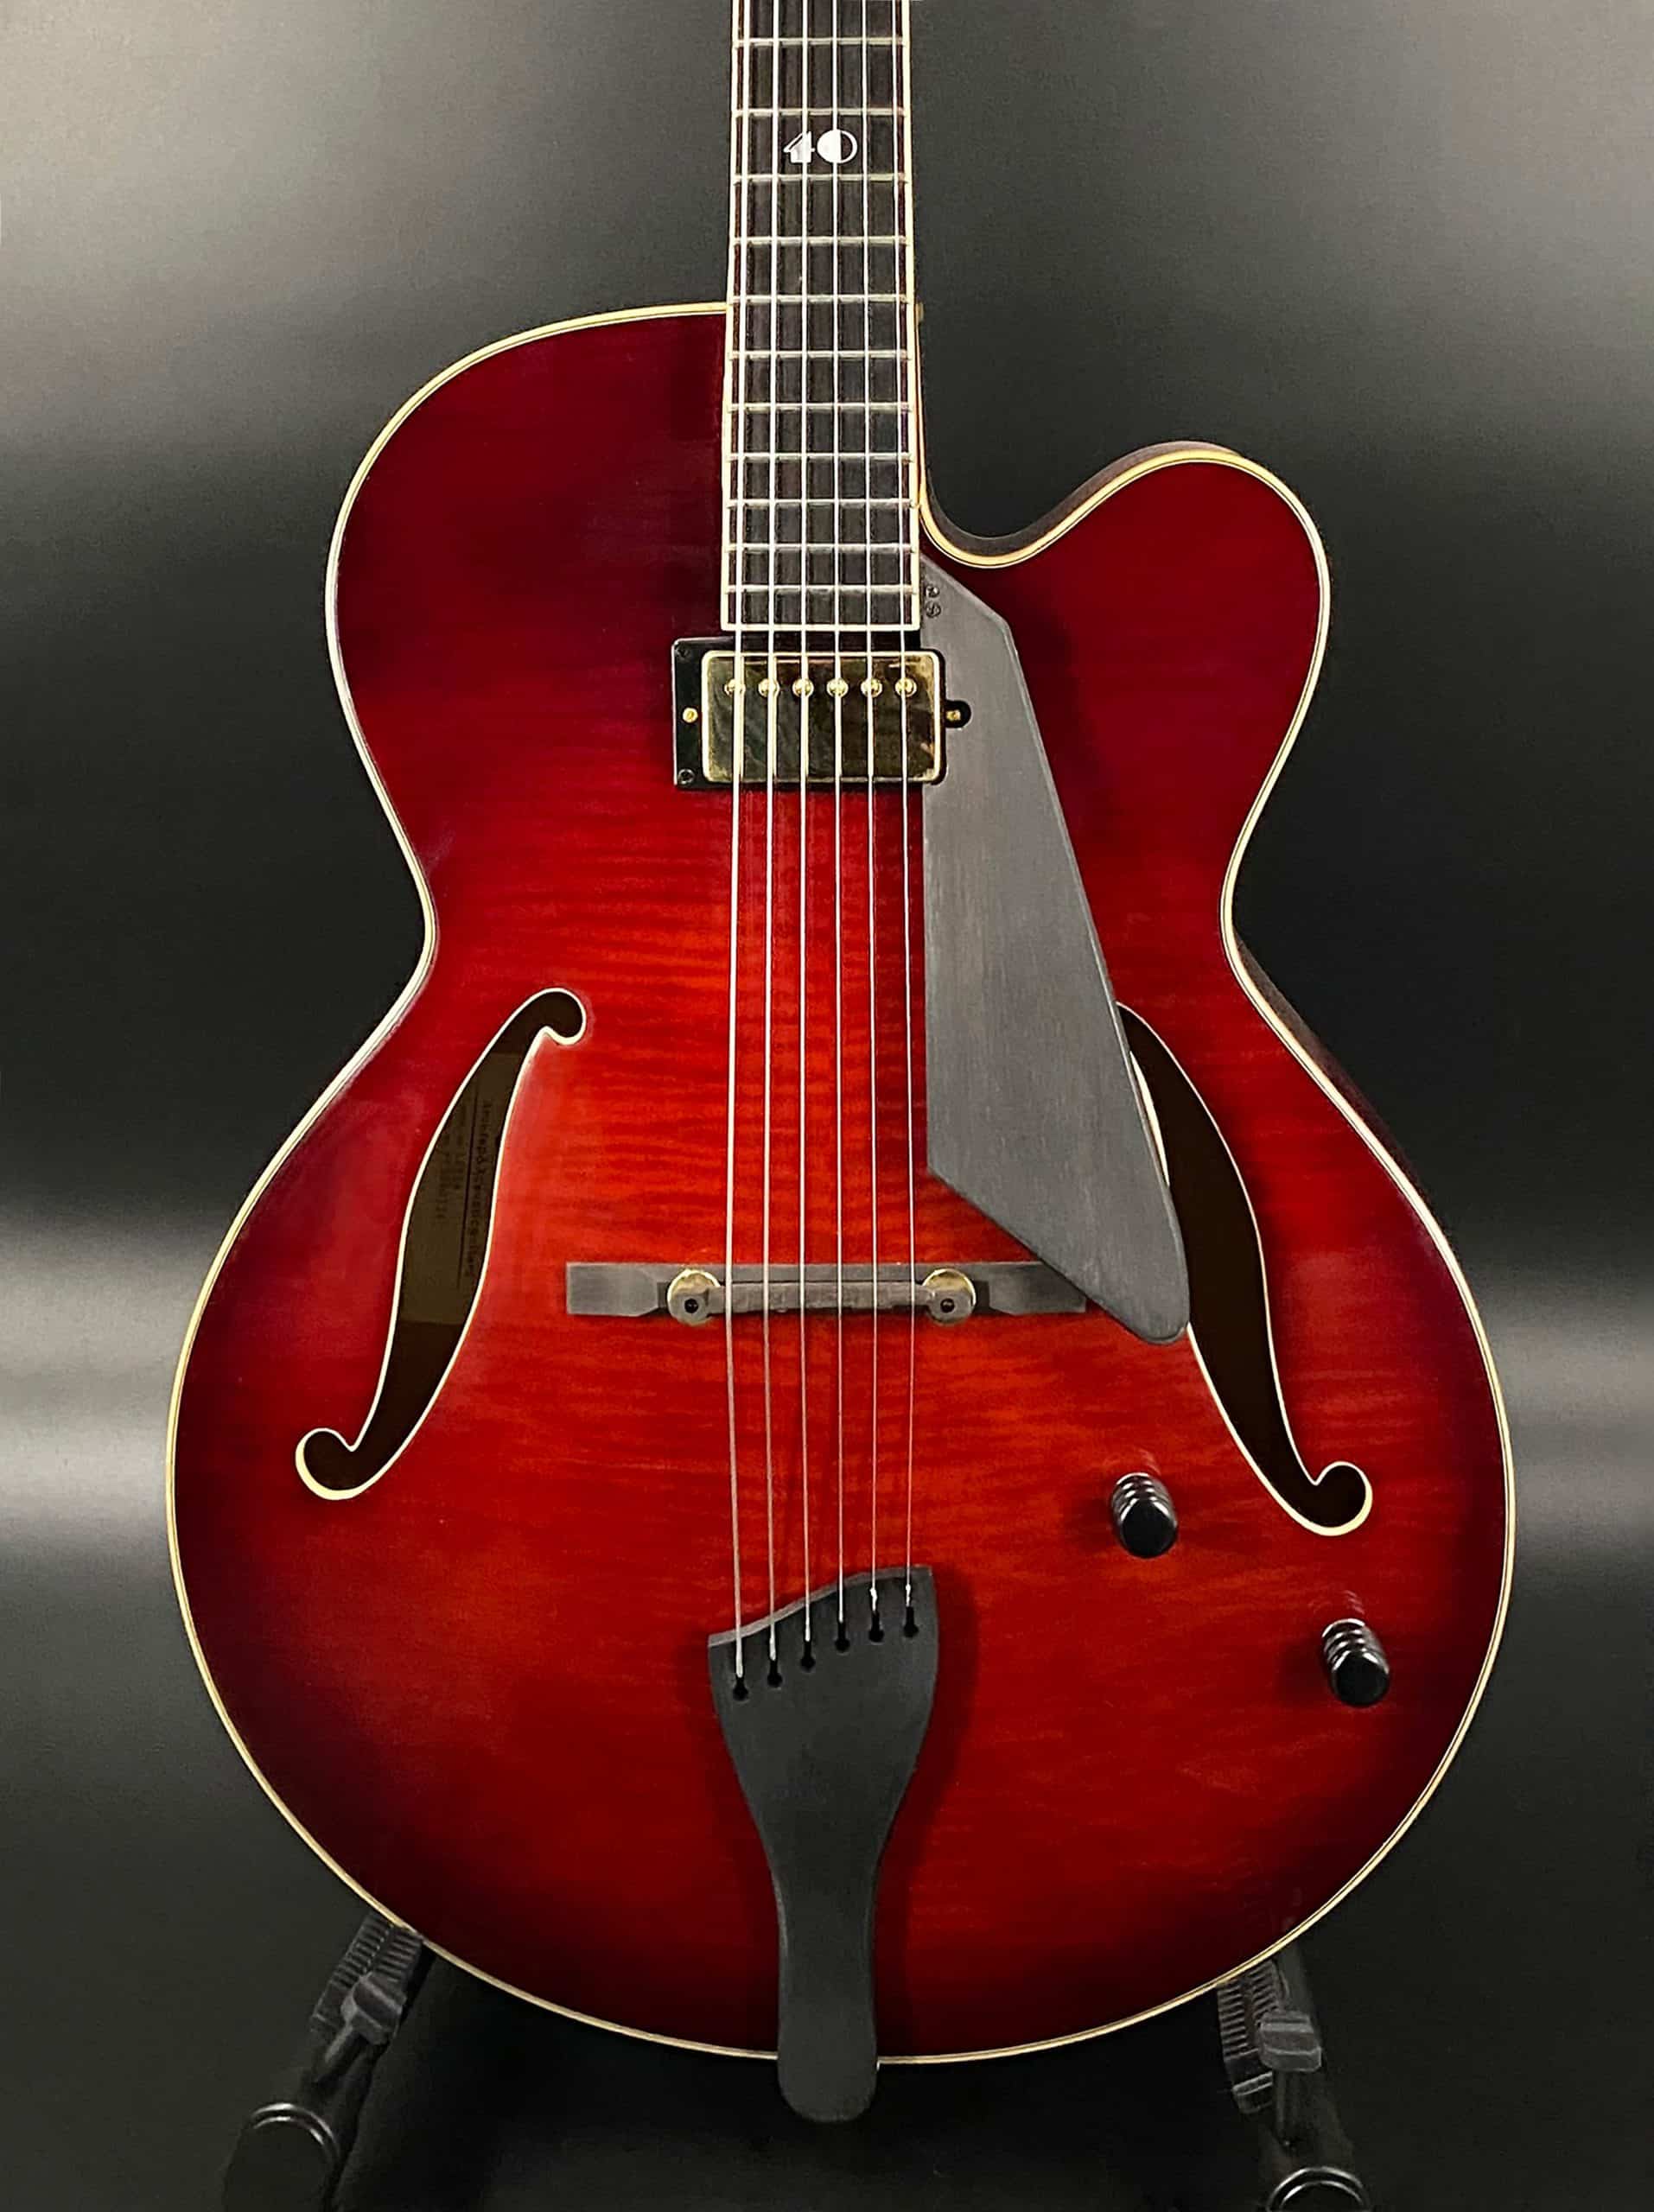 Peerless Leela 40 Limited Edition Archtop Hollow Body (2018)